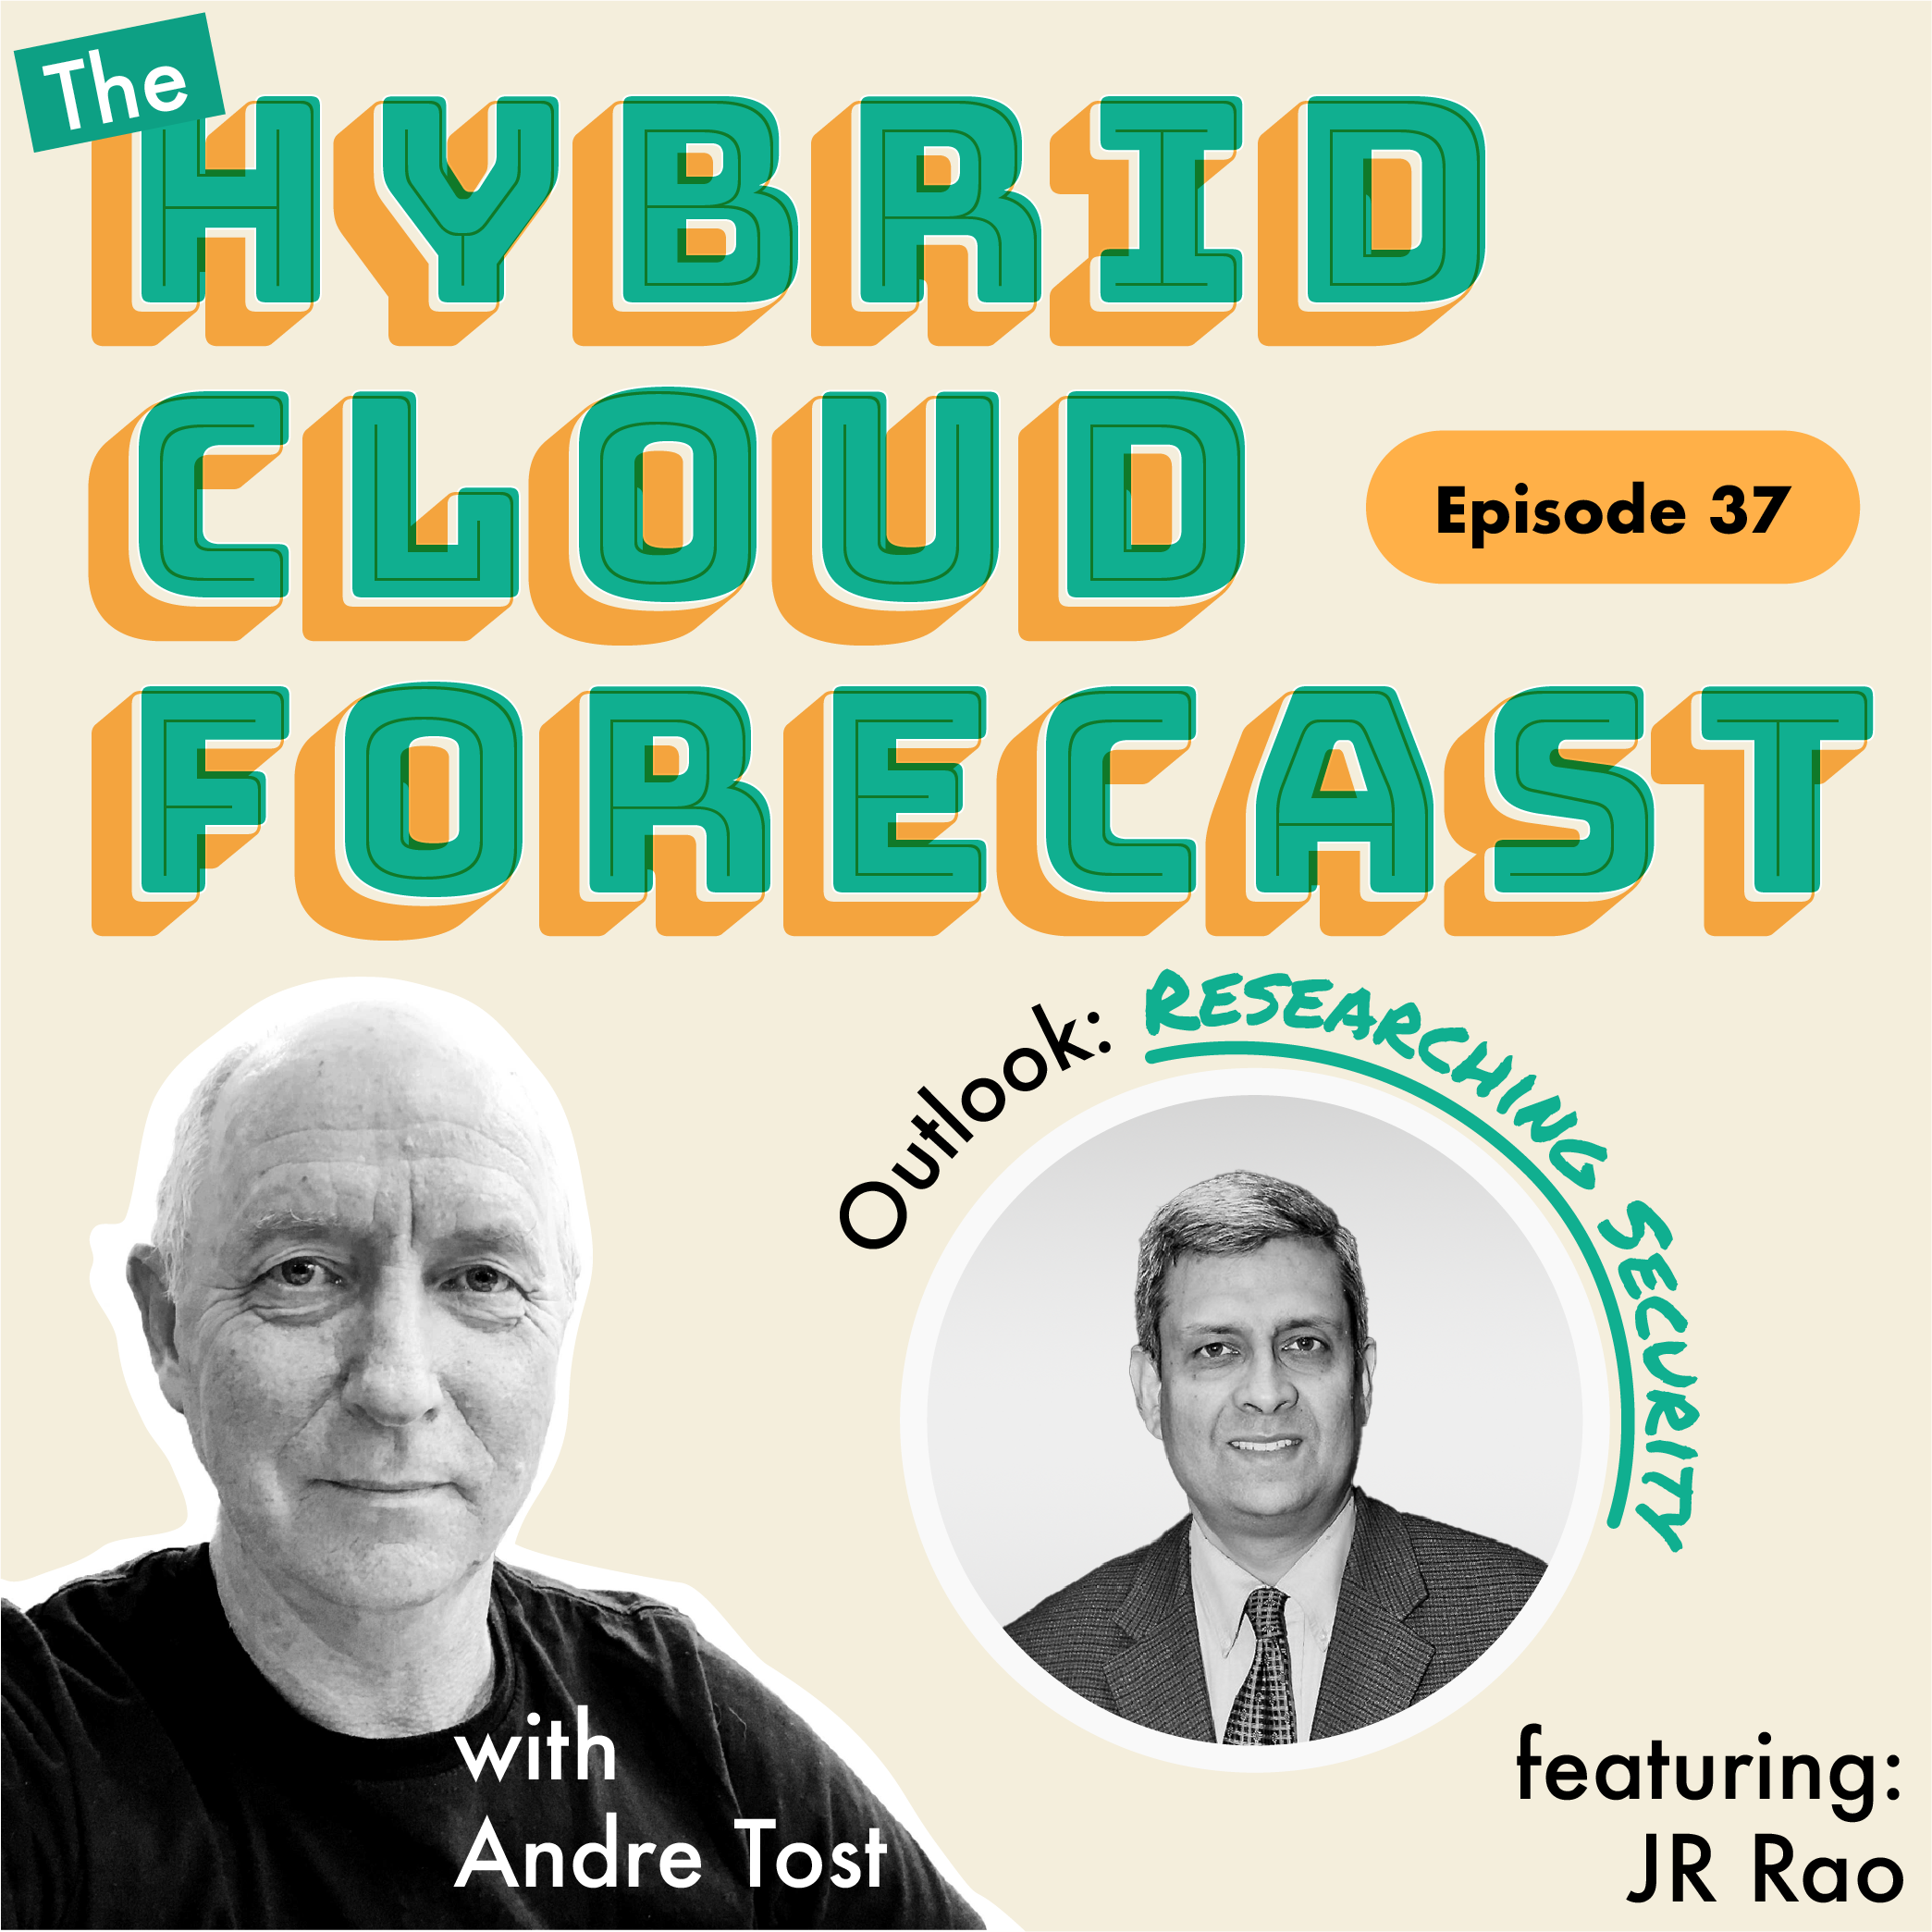 Episode 37: The Hybrid Cloud Forecast - Outlook: Researching Security